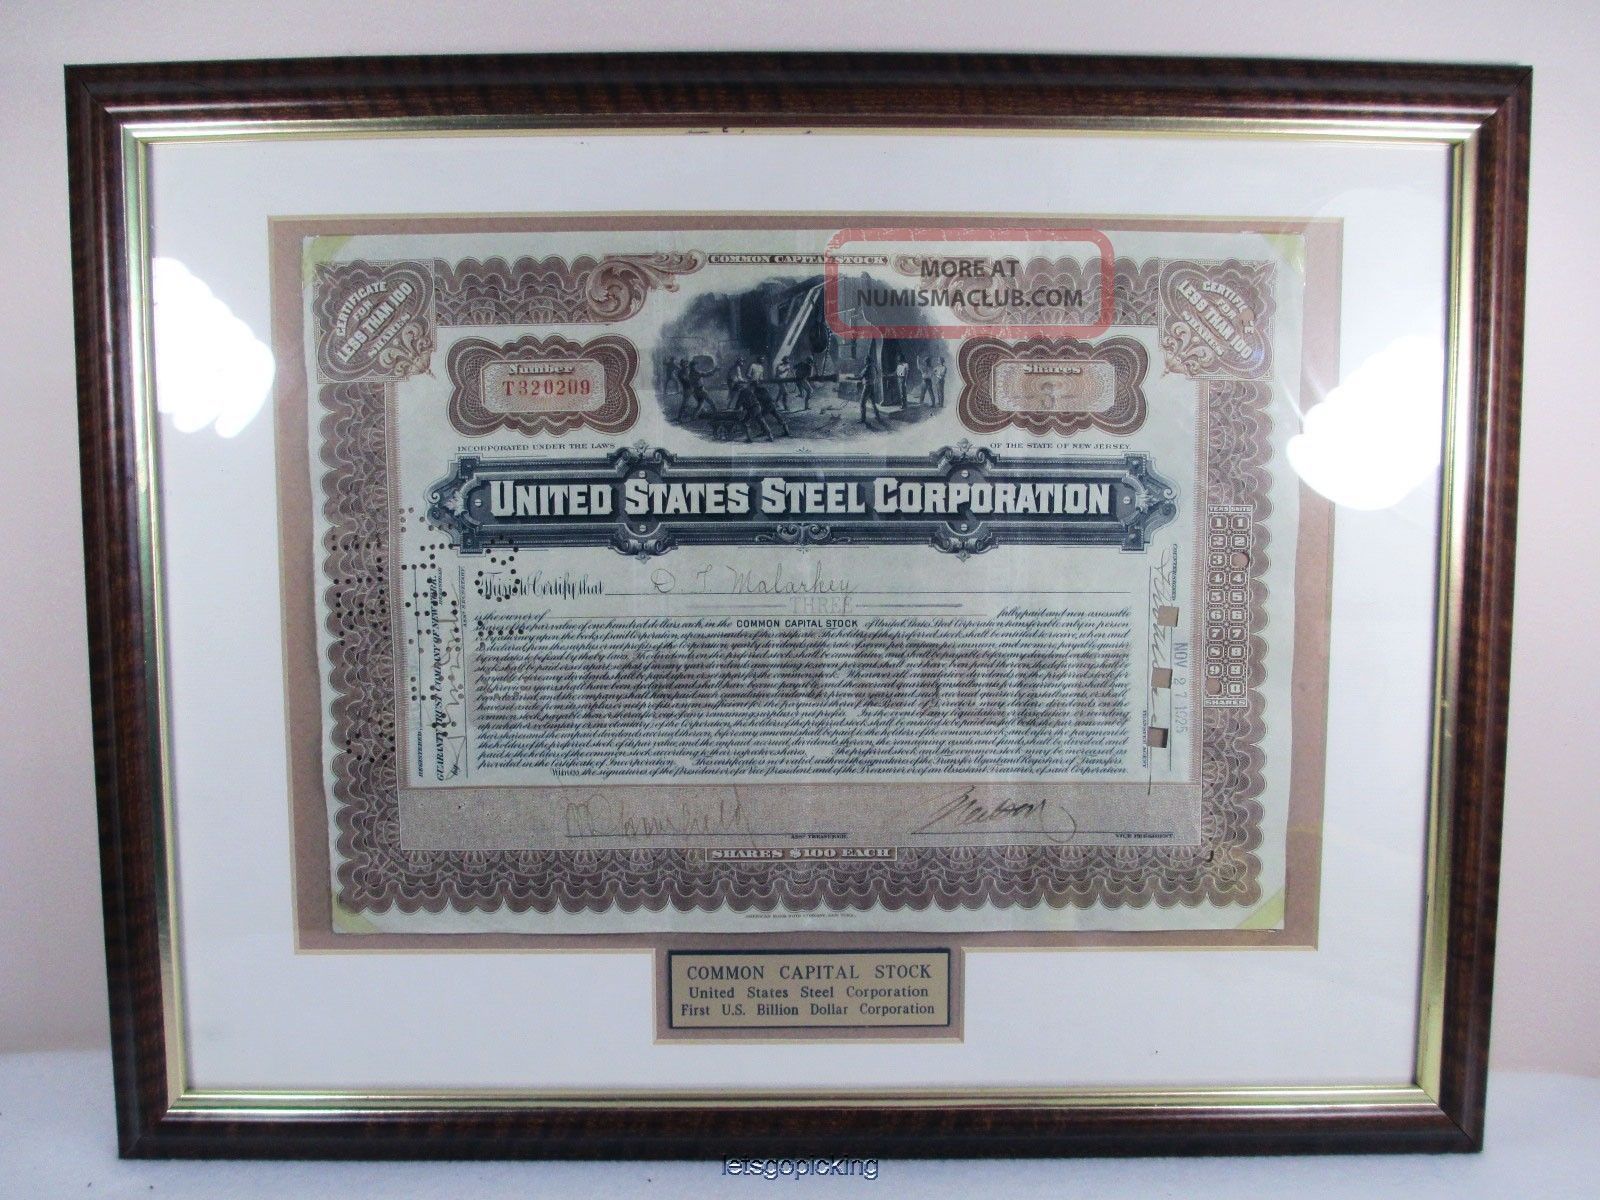 Us Steel Corporation Stock Certificate Framed W Certificate Of Authenticity Stocks & Bonds, Scripophily photo